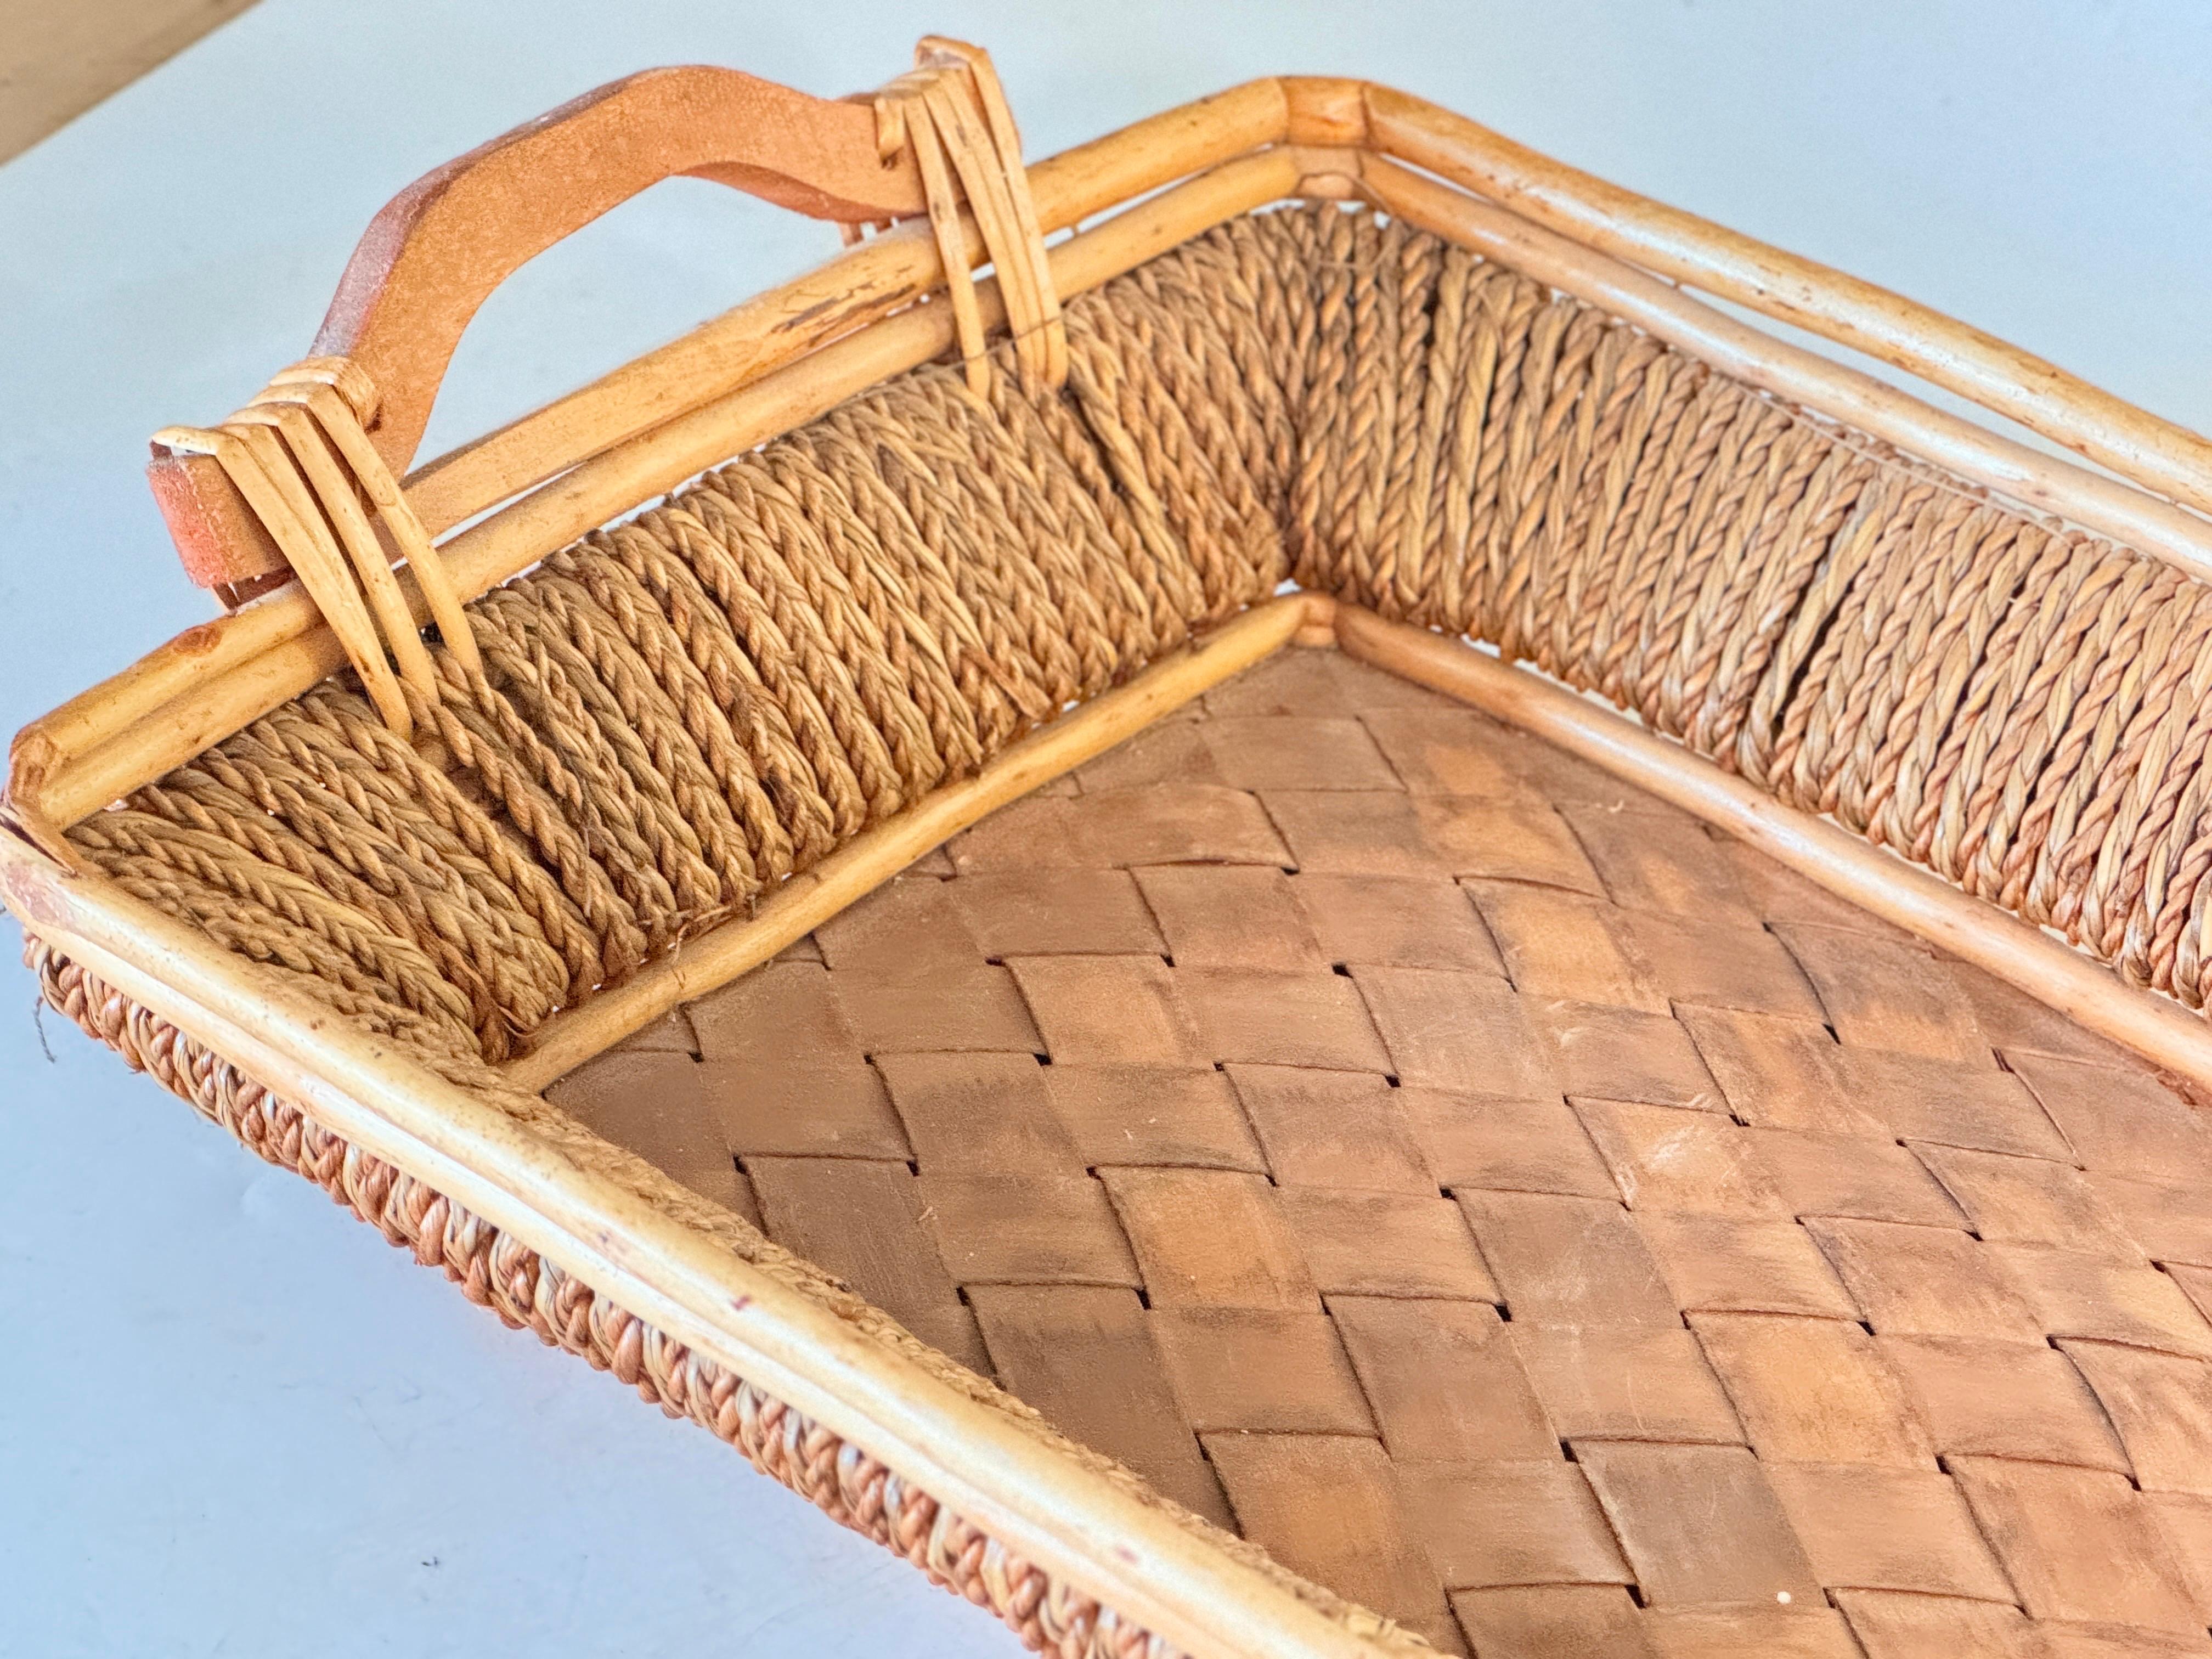 Rattan and Rope Italian Basket Bowl Centerpiece, 1970s Crespi Style For Sale 2